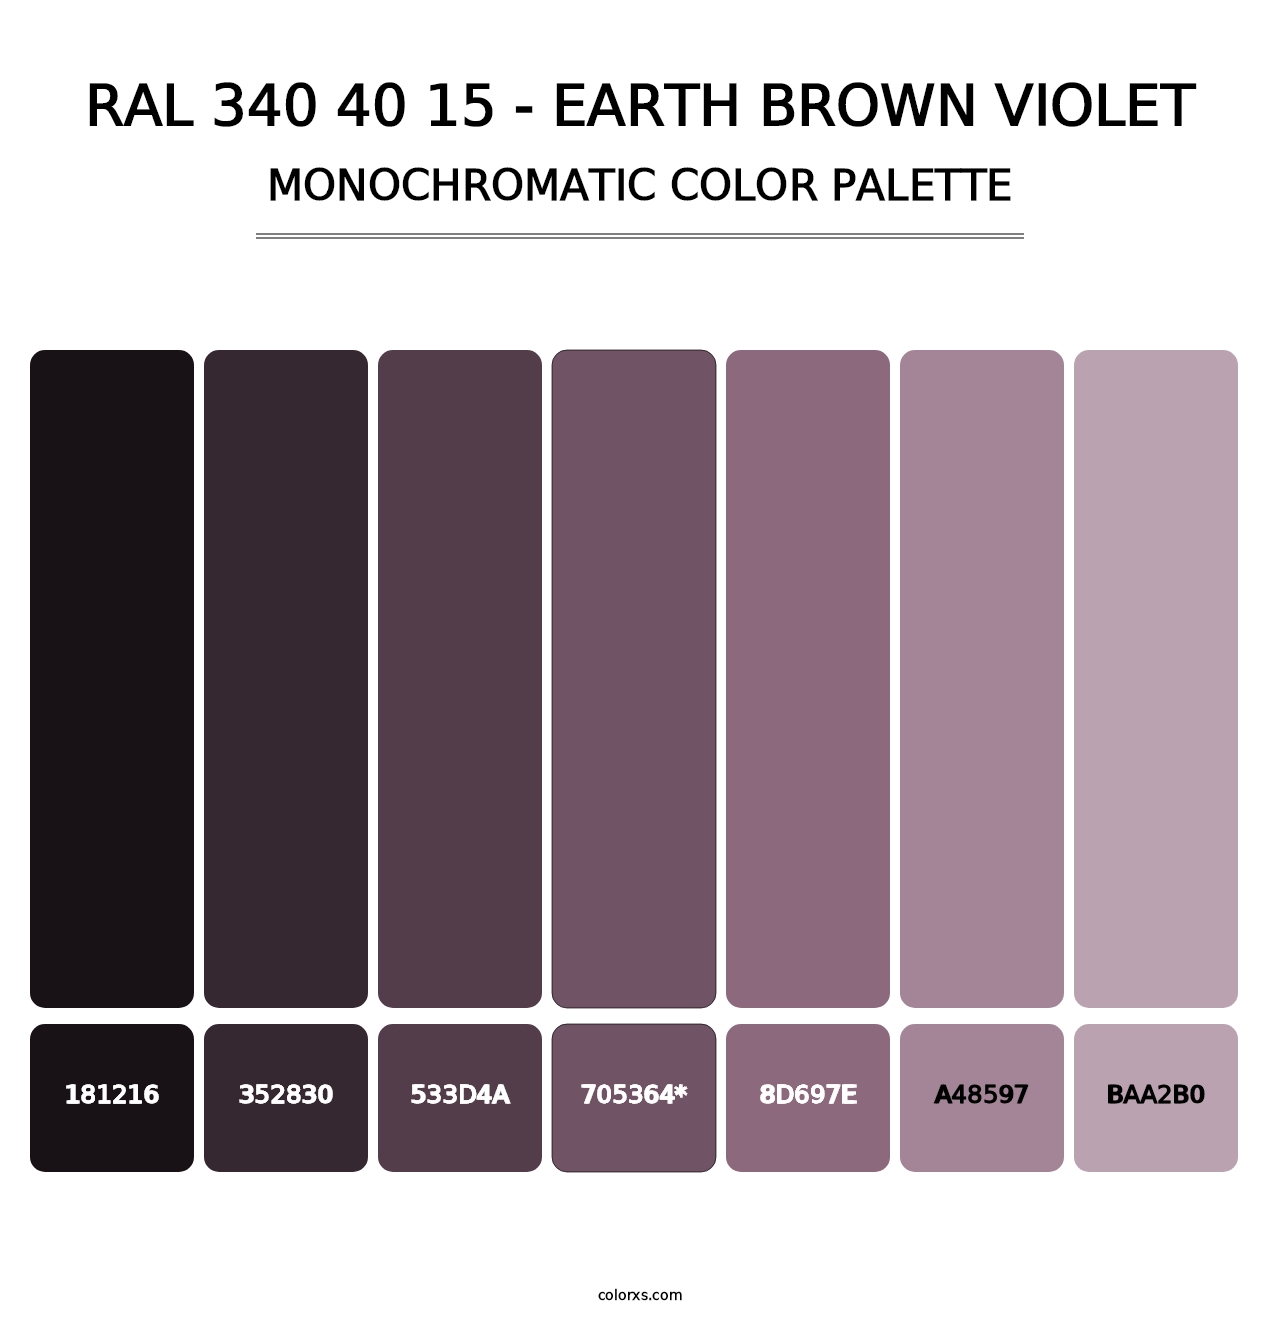 RAL 340 40 15 - Earth Brown Violet - Monochromatic Color Palette